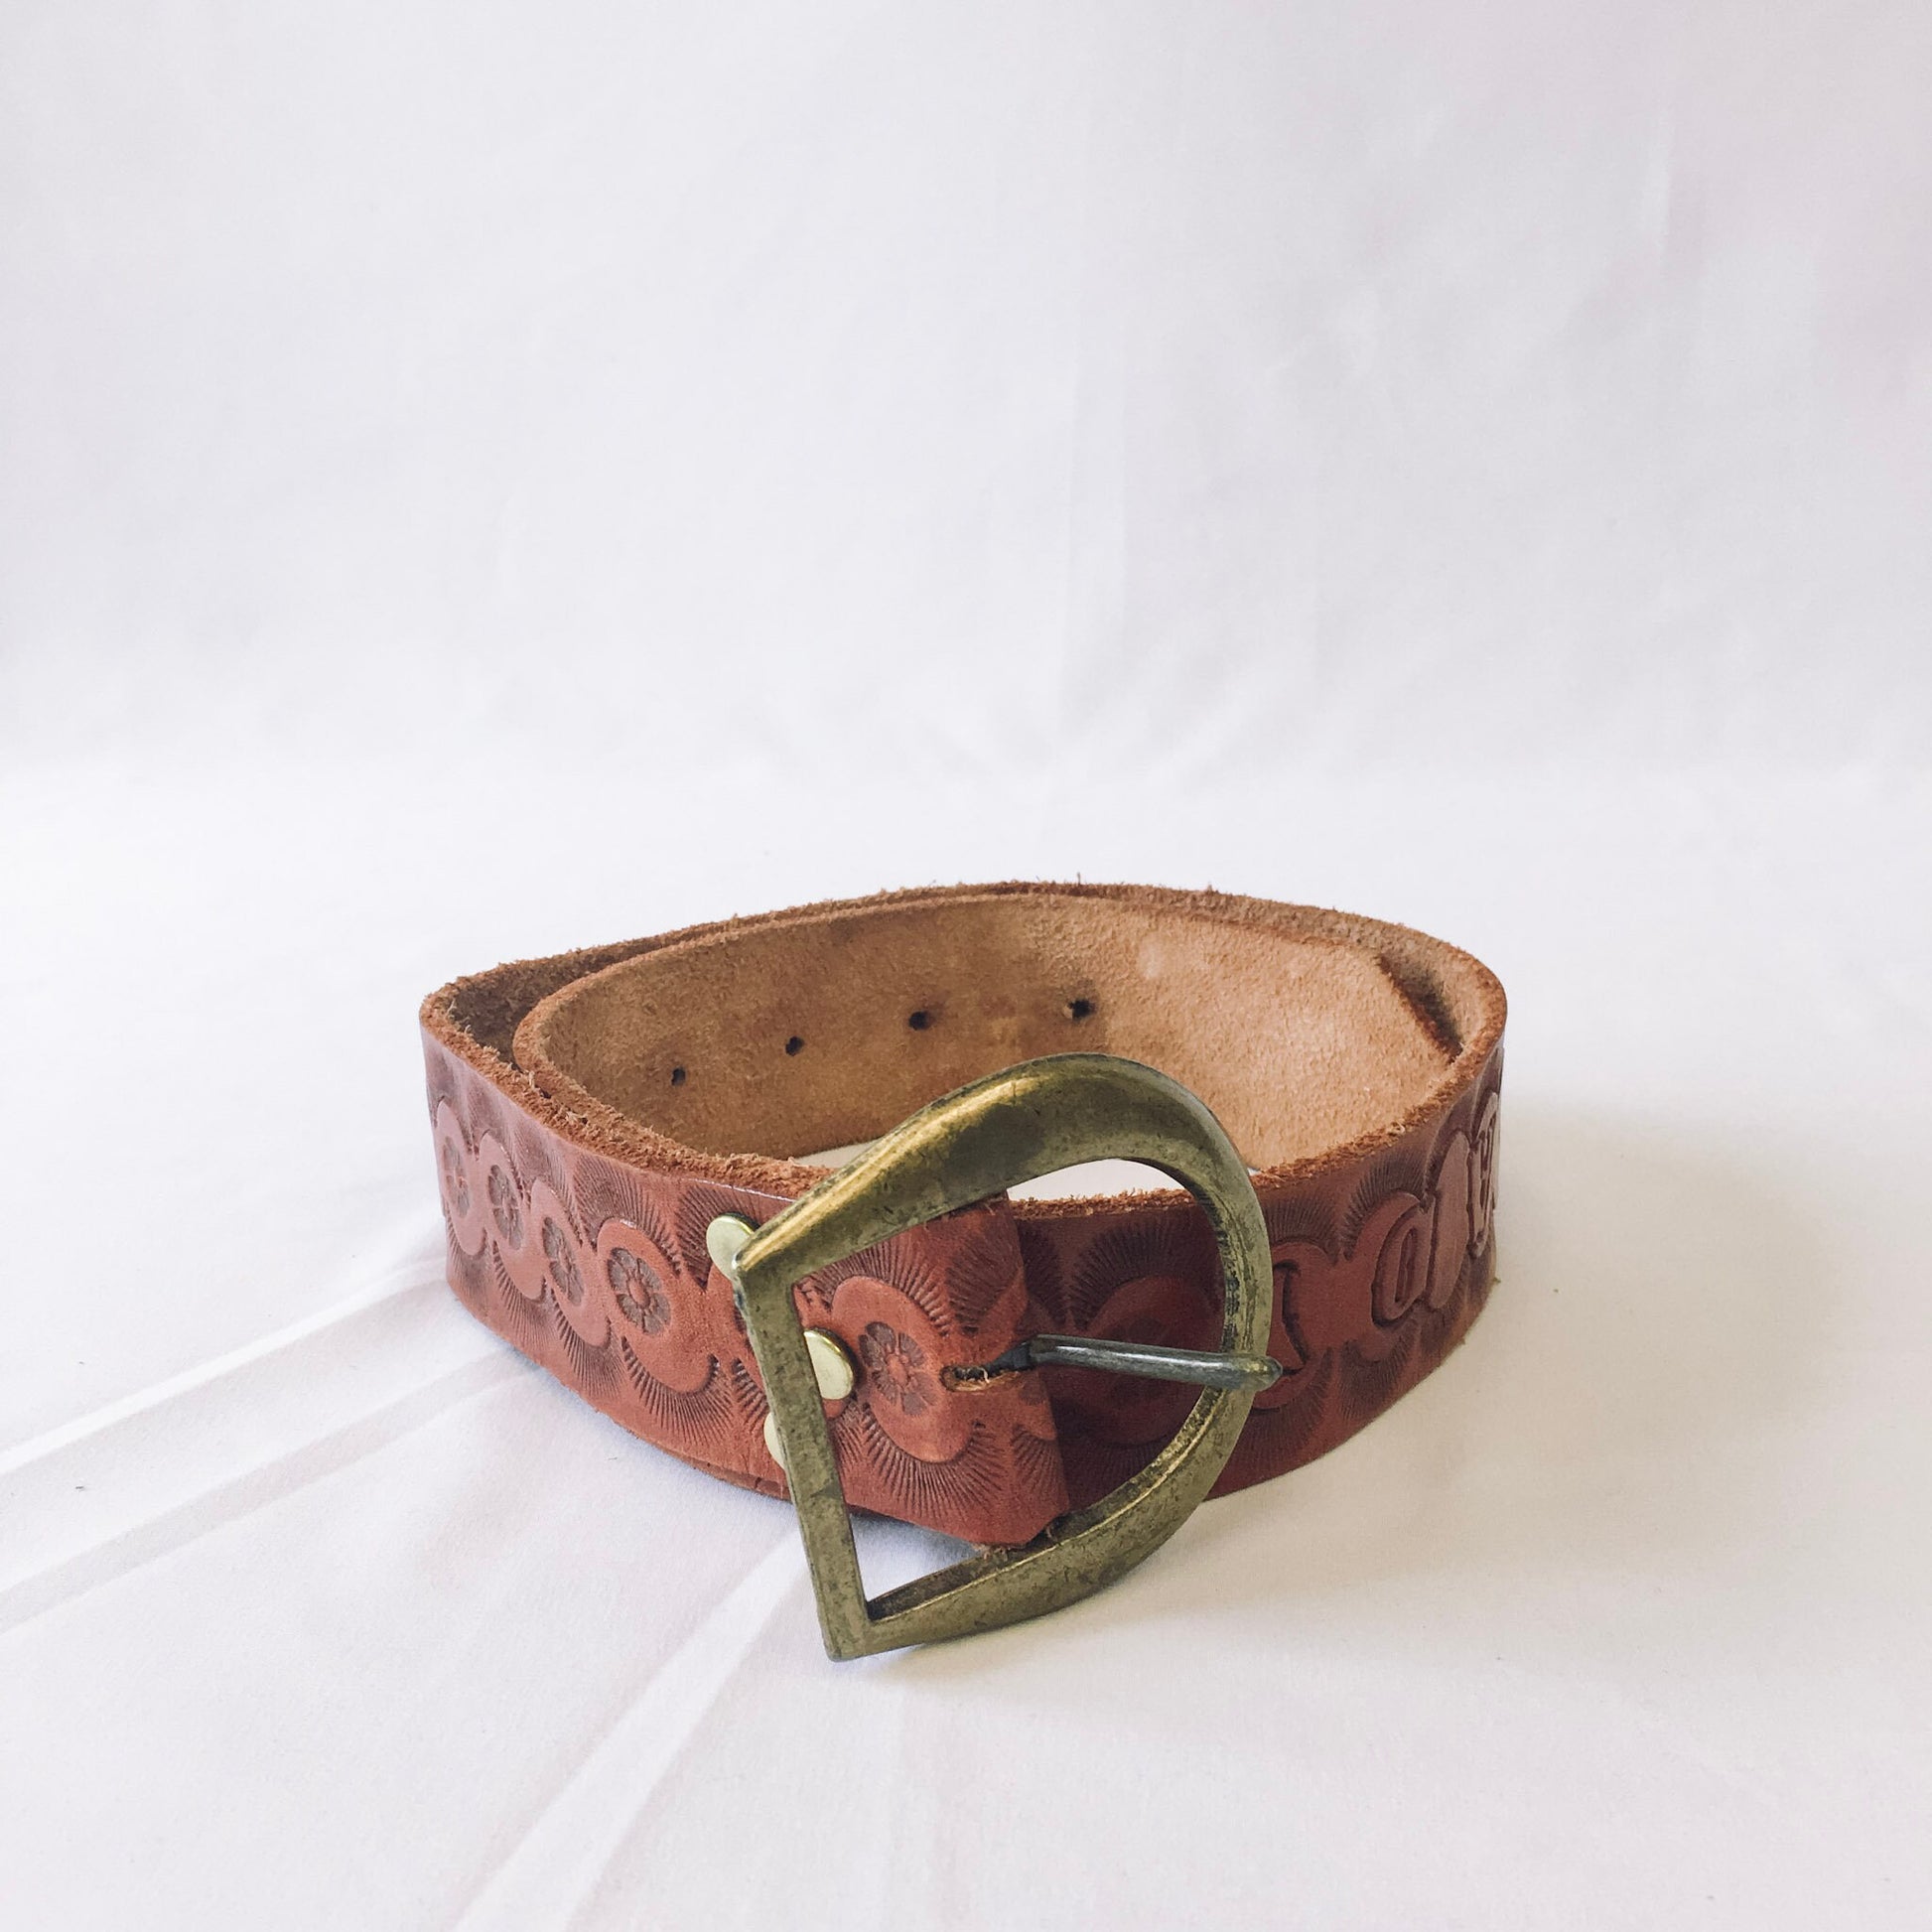 Vintage Tooled Leather Belt, Gold Horseshoe Buckle Belt with floral and engraved detail: "Foxy Lady"